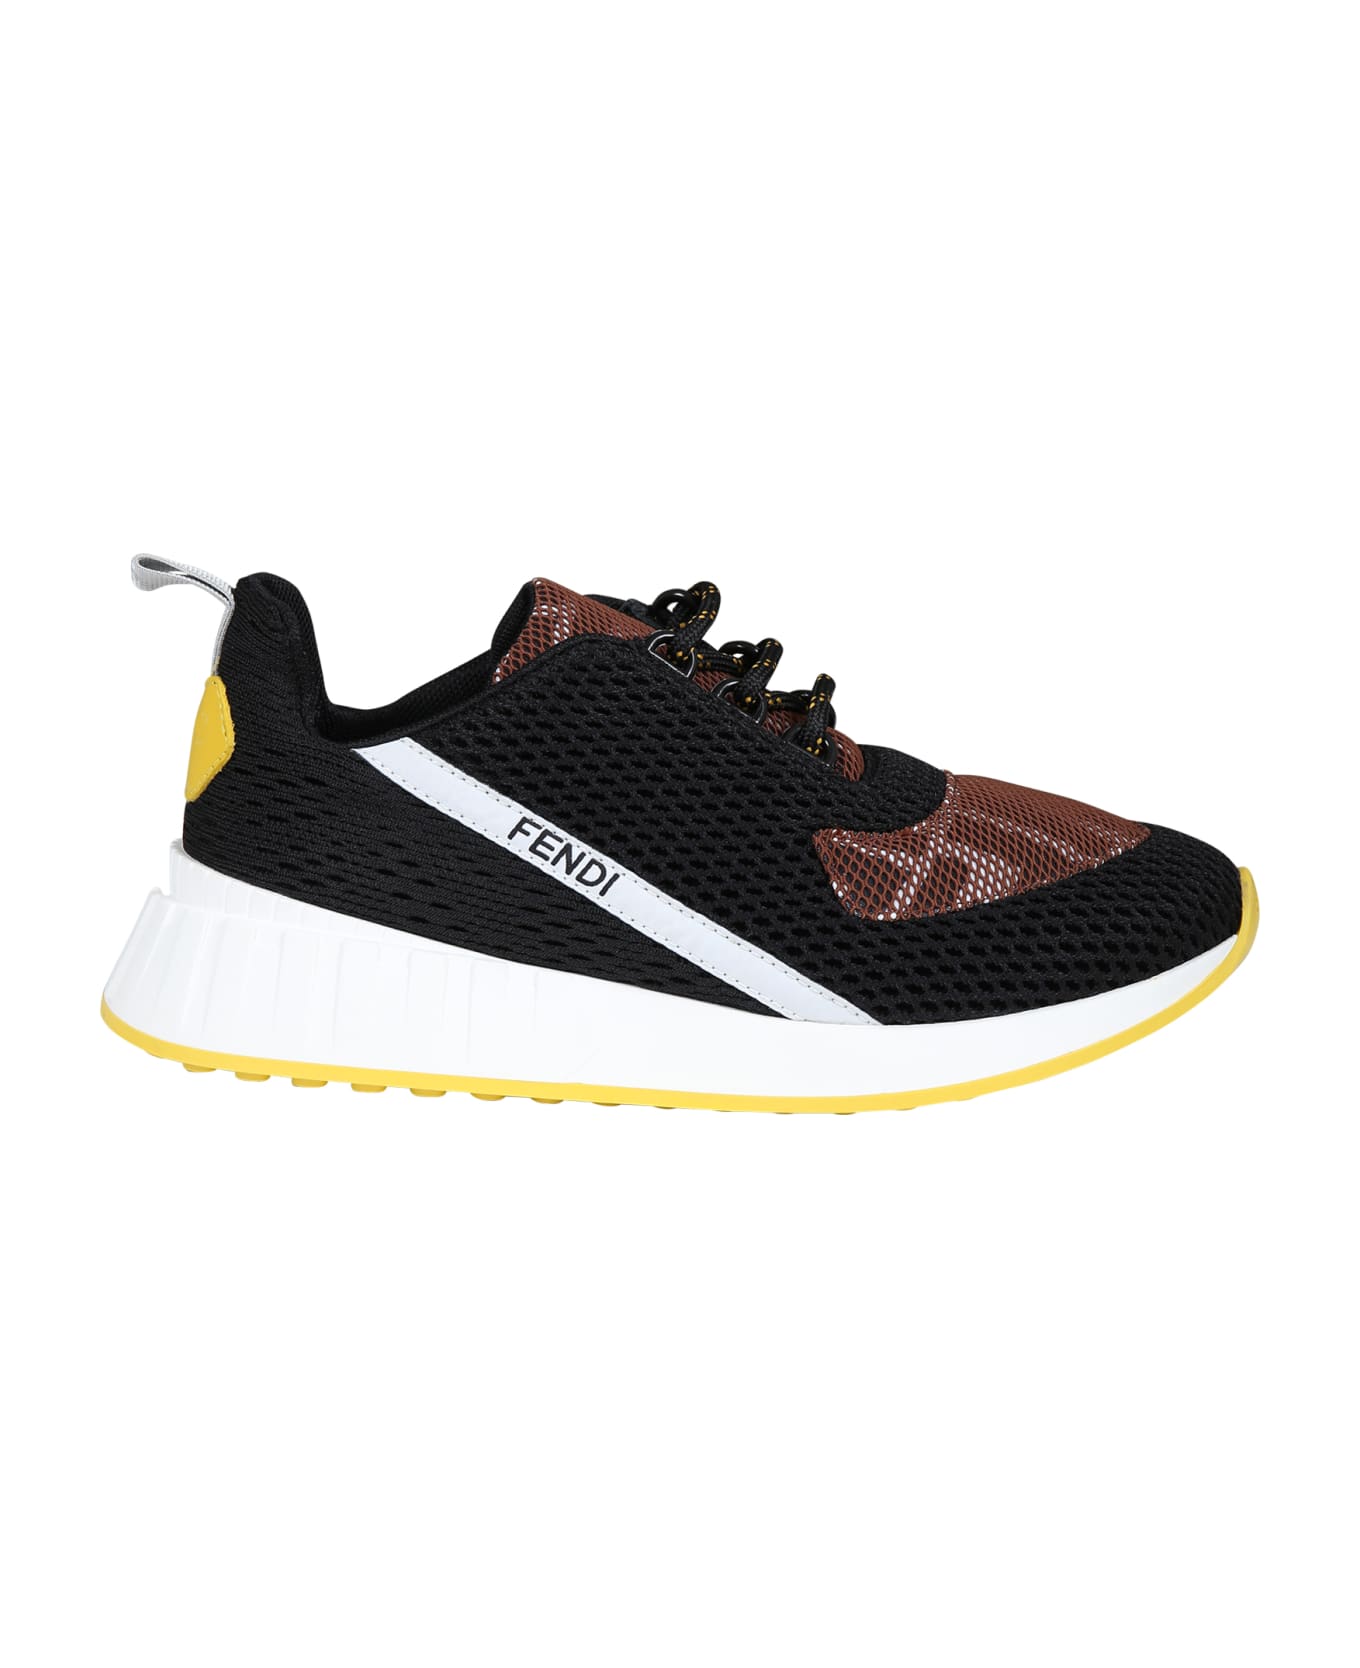 Fendi Black Sneakers For Kids With Iconic Double F - H Nero Bianco